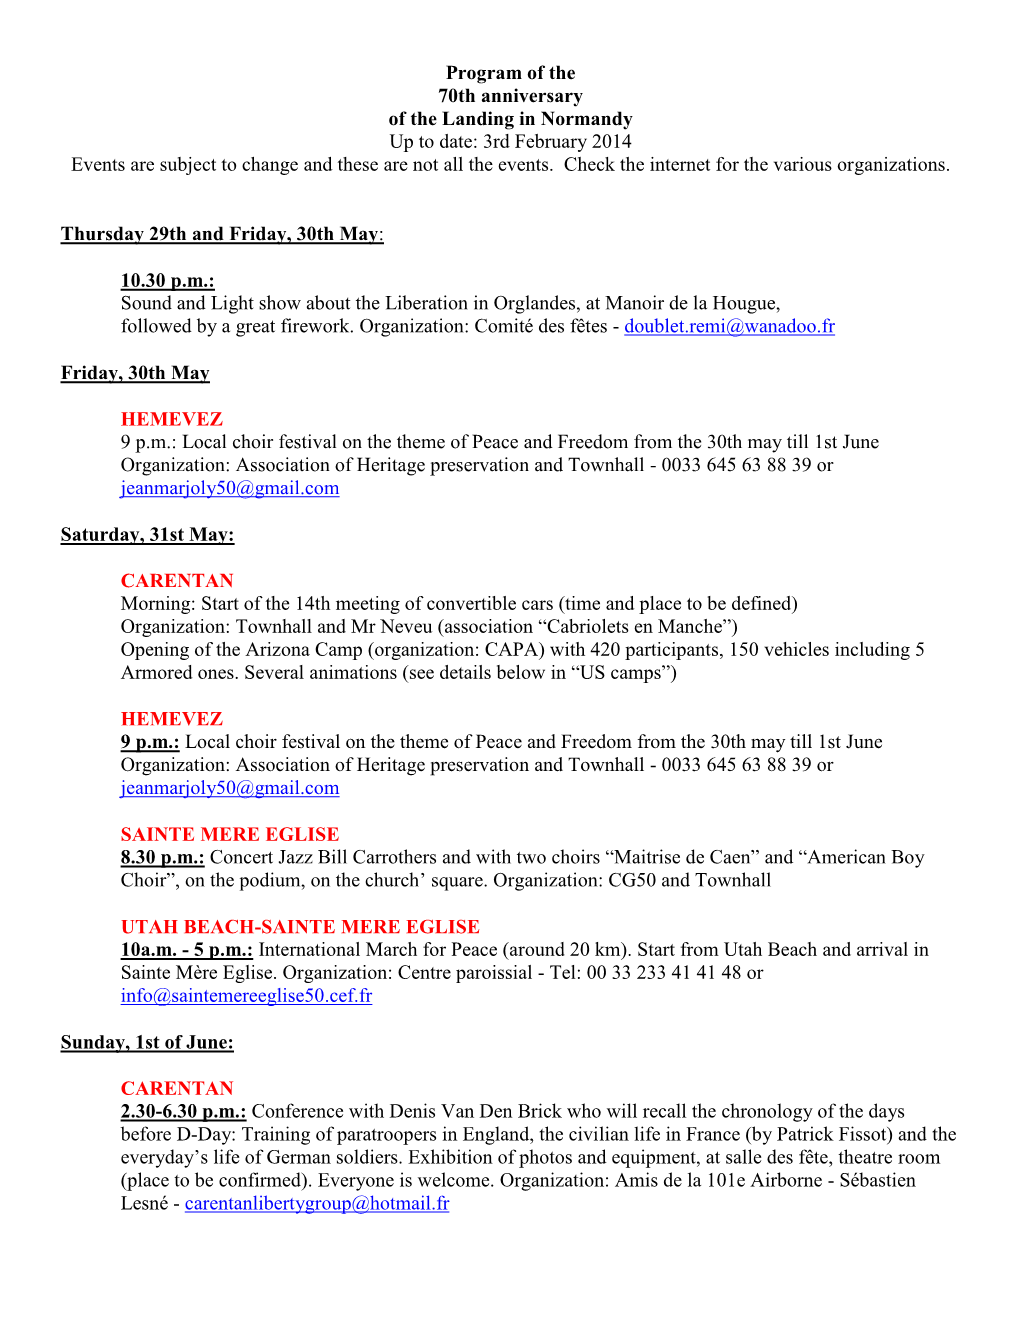 Program of the 70Th Anniversary of the Landing in Normandy up to Date: 3Rd February 2014 Events Are Subject to Change and These Are Not All the Events